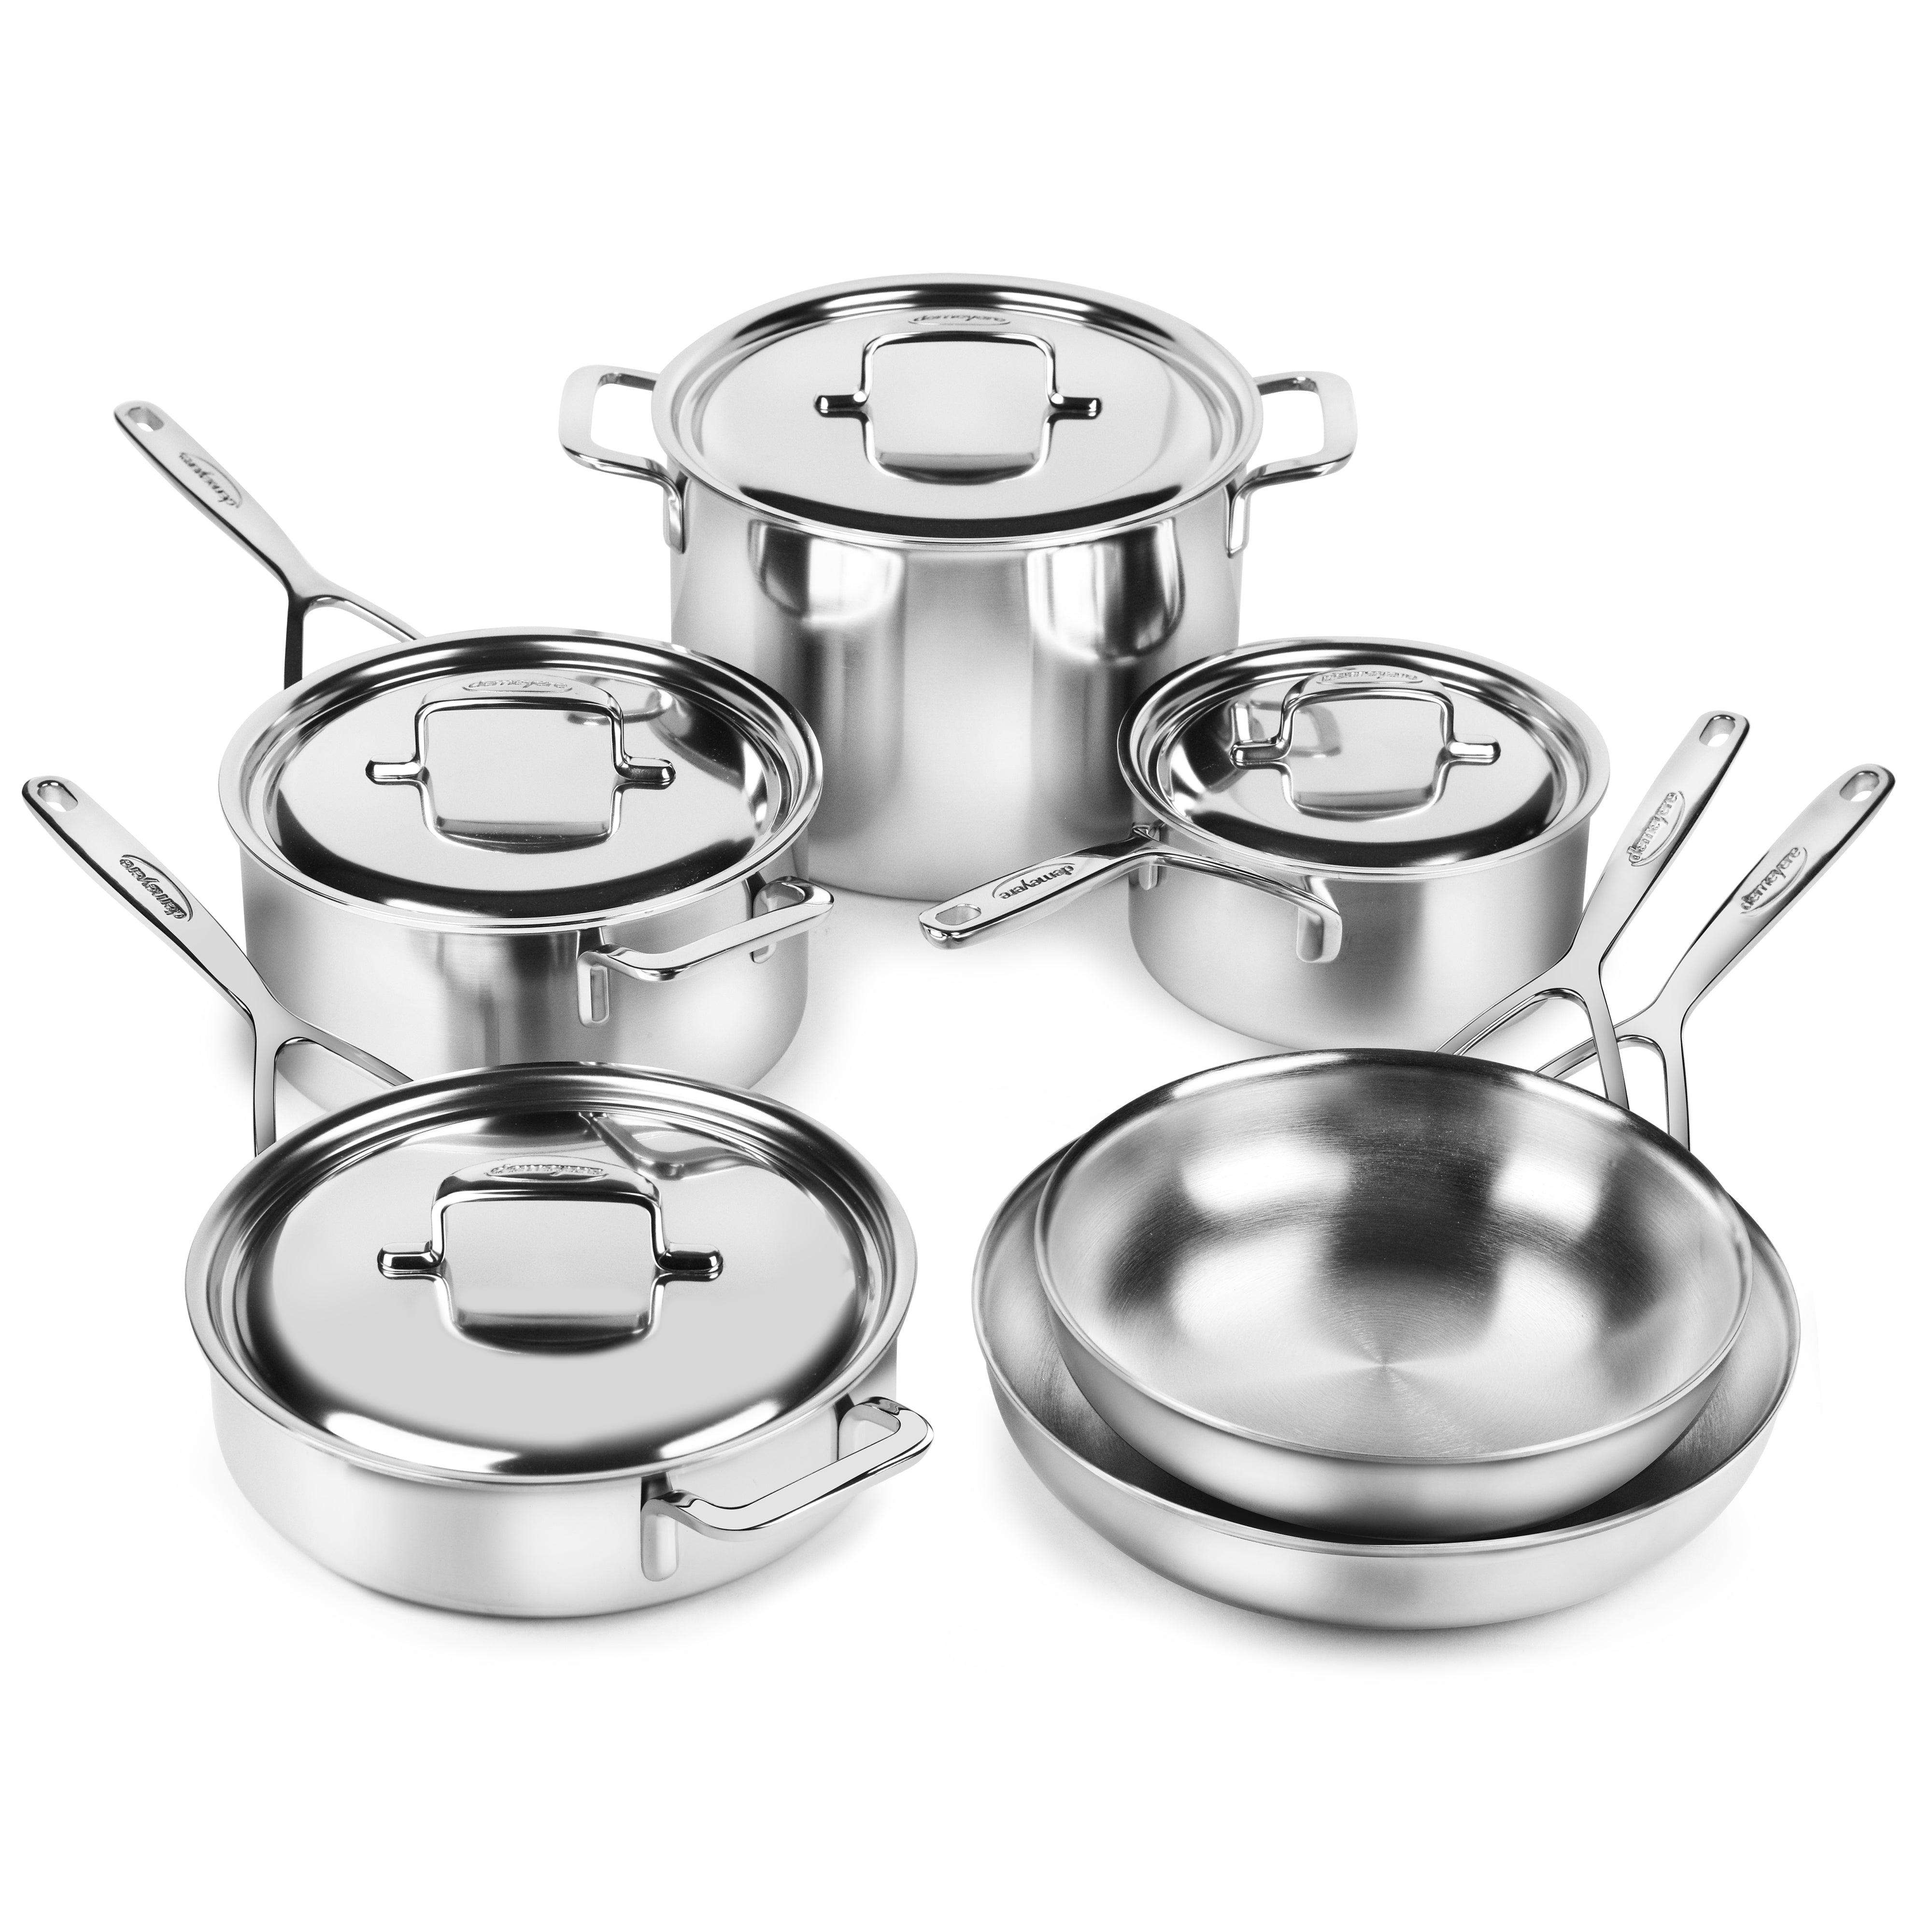 Demeyere 5-Plus 10-Pc. Stainless Steel Cookware Set - Macy's